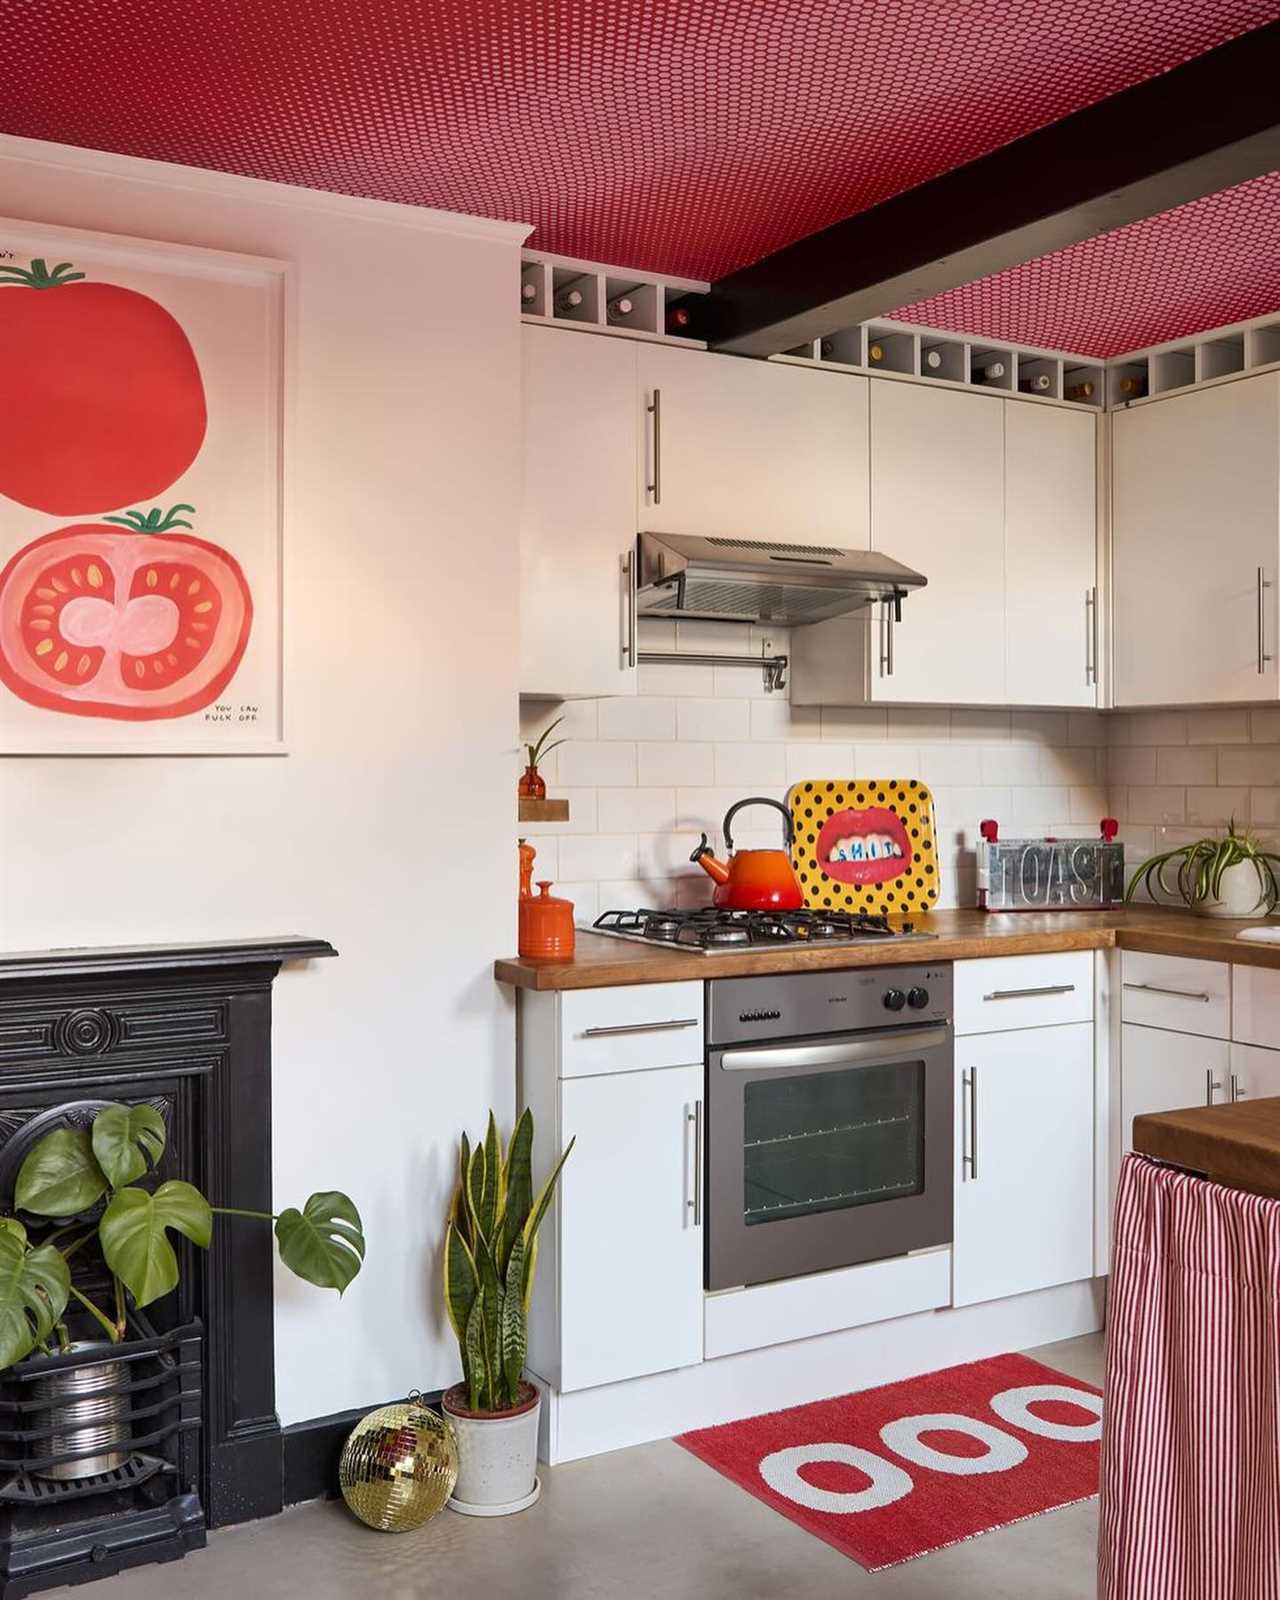 Strictly's Layton Williams showcases his vibrant London flat transformation with quirky kitchen and pops of pink